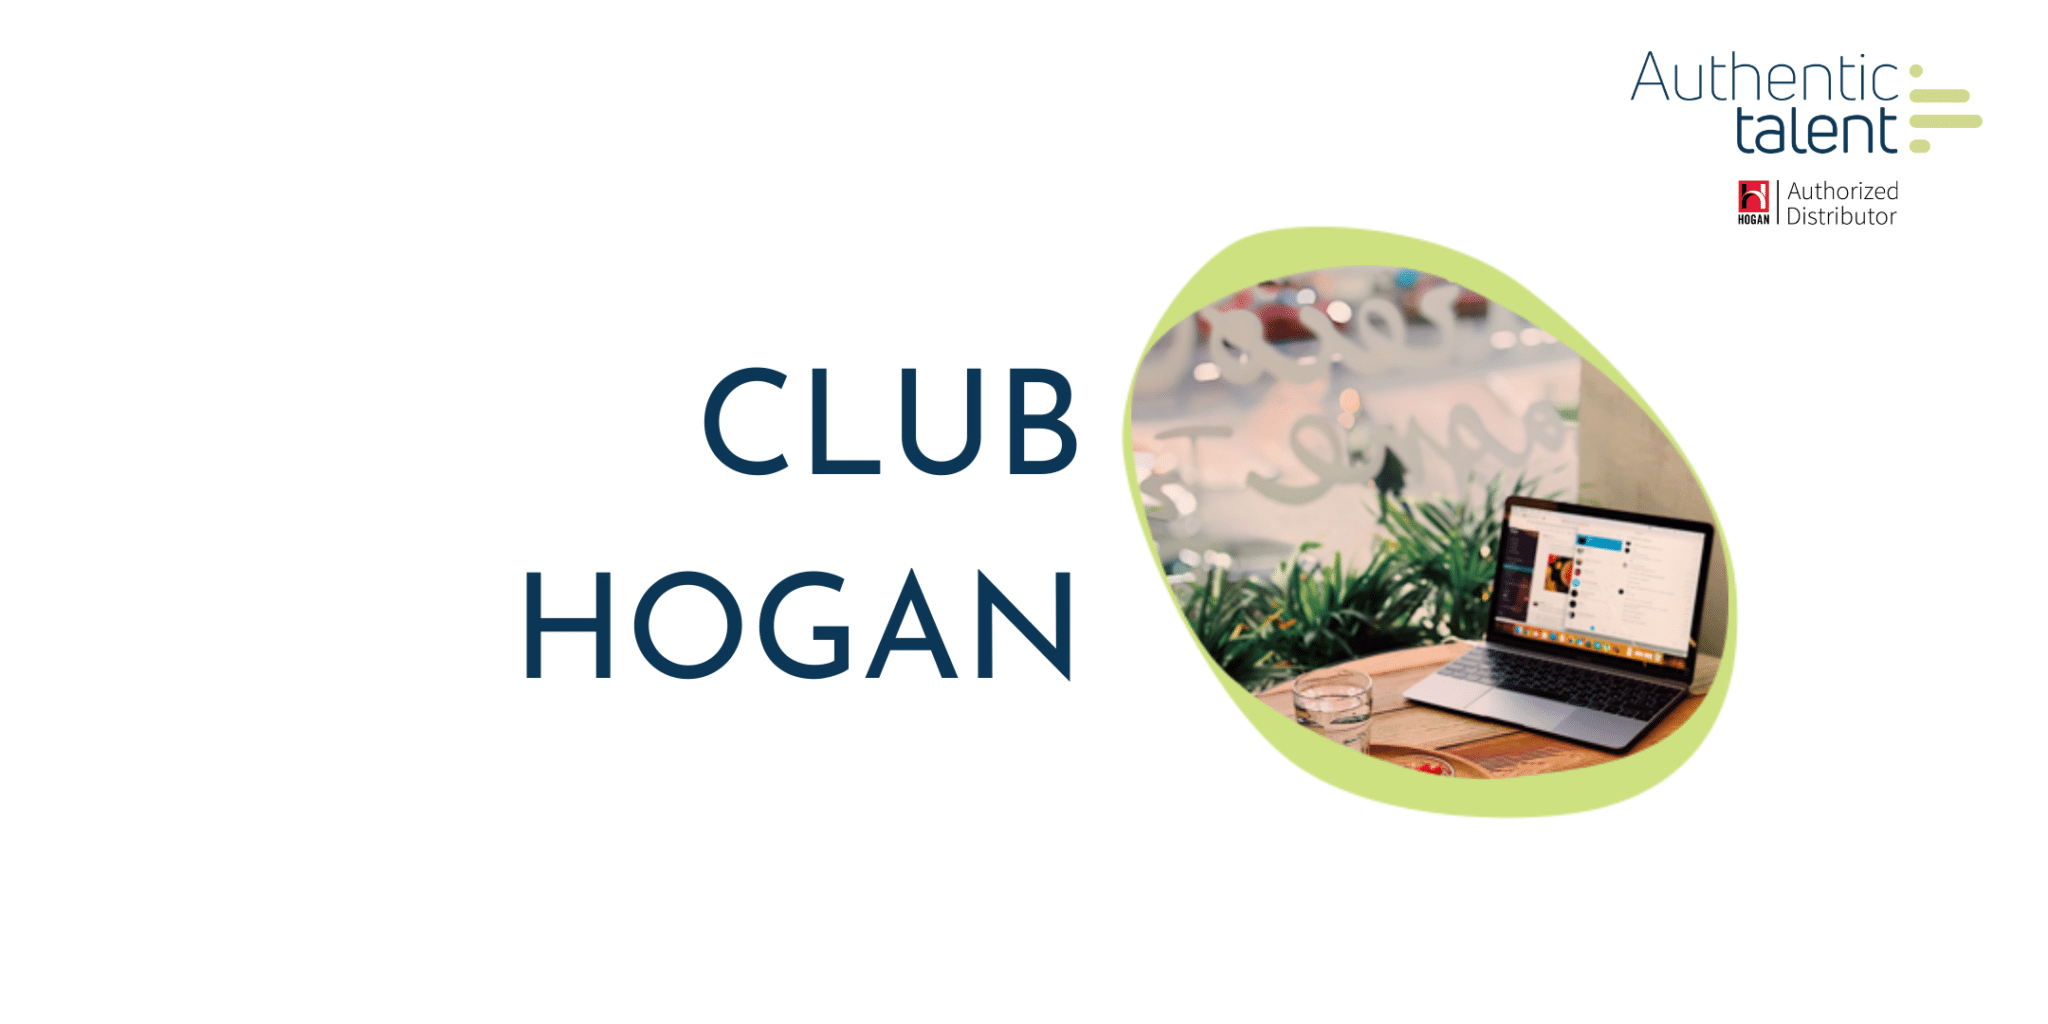 Club Hogan – How to REALLY measure Potential ?